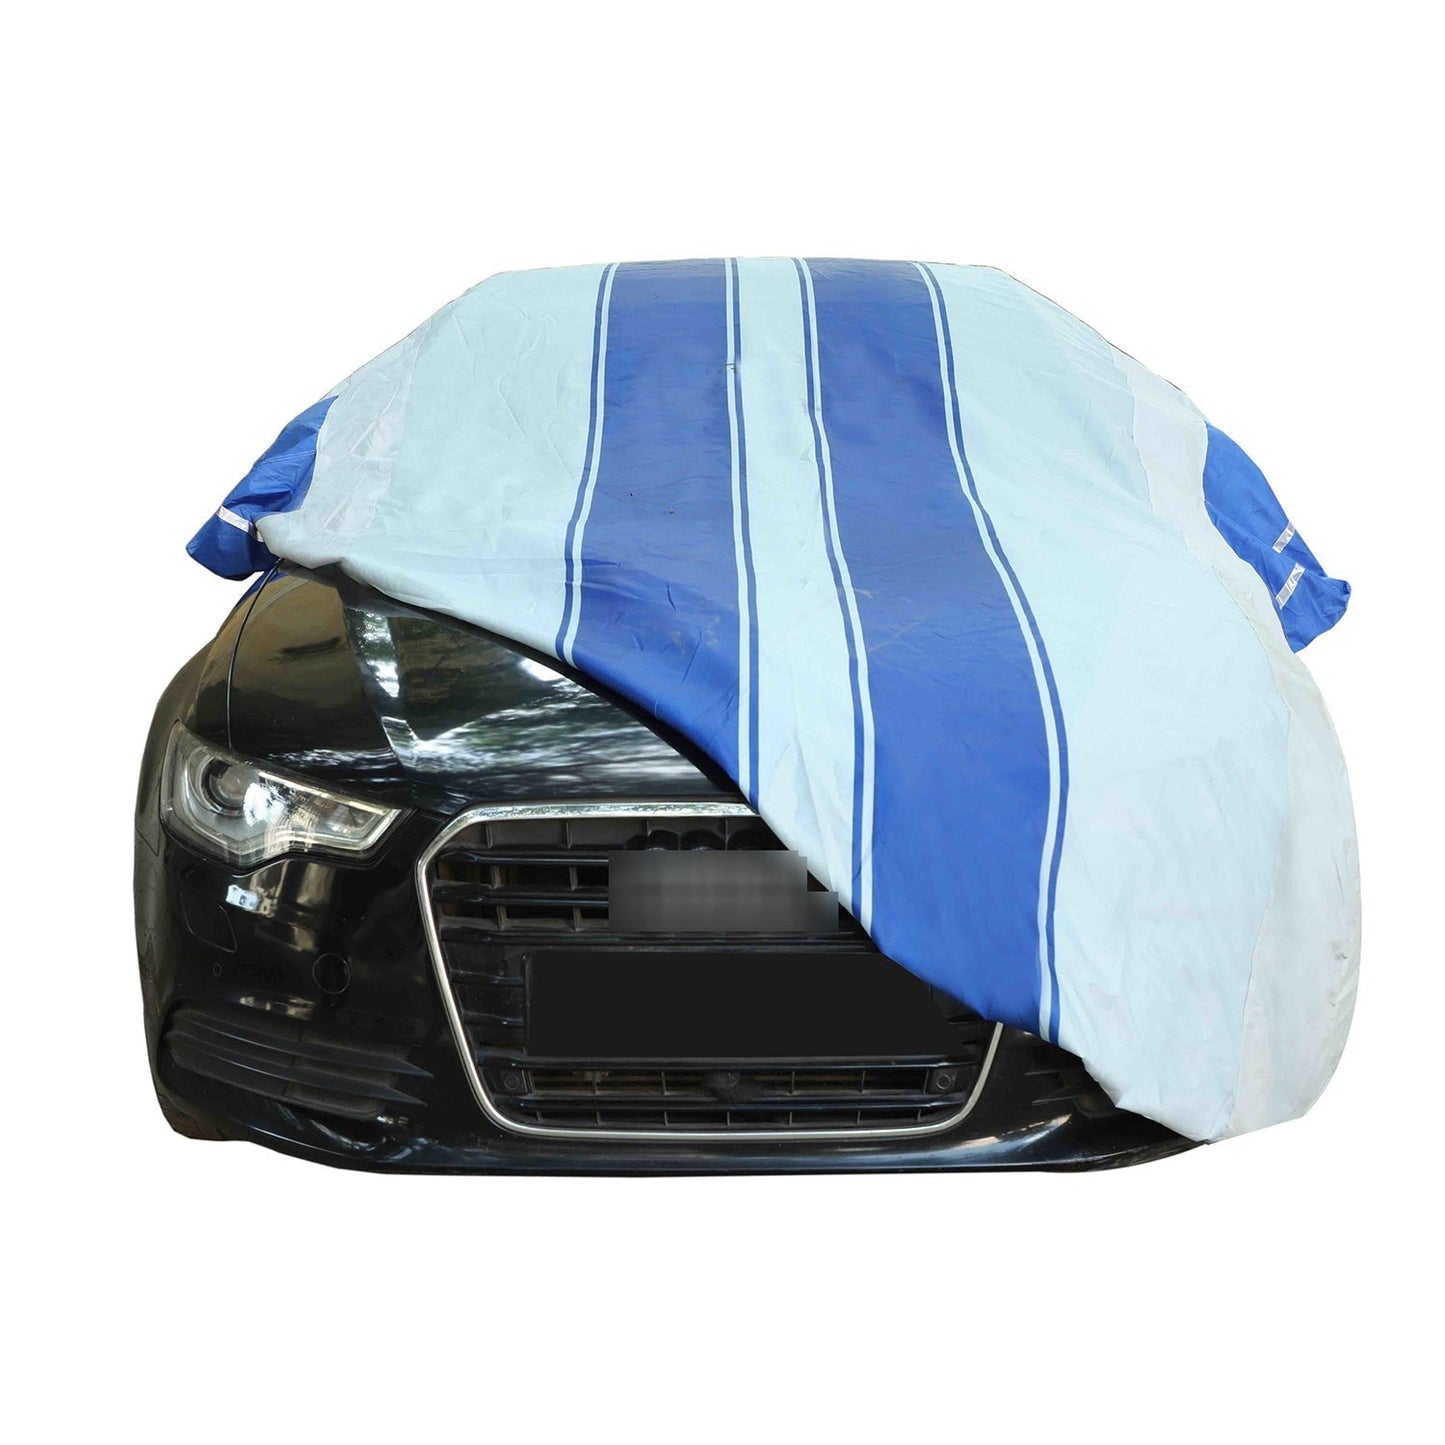 Oshotto 100% Blue dustproof and Water Resistant Car Body Cover with Mirror Pockets For Volkswagen Polo